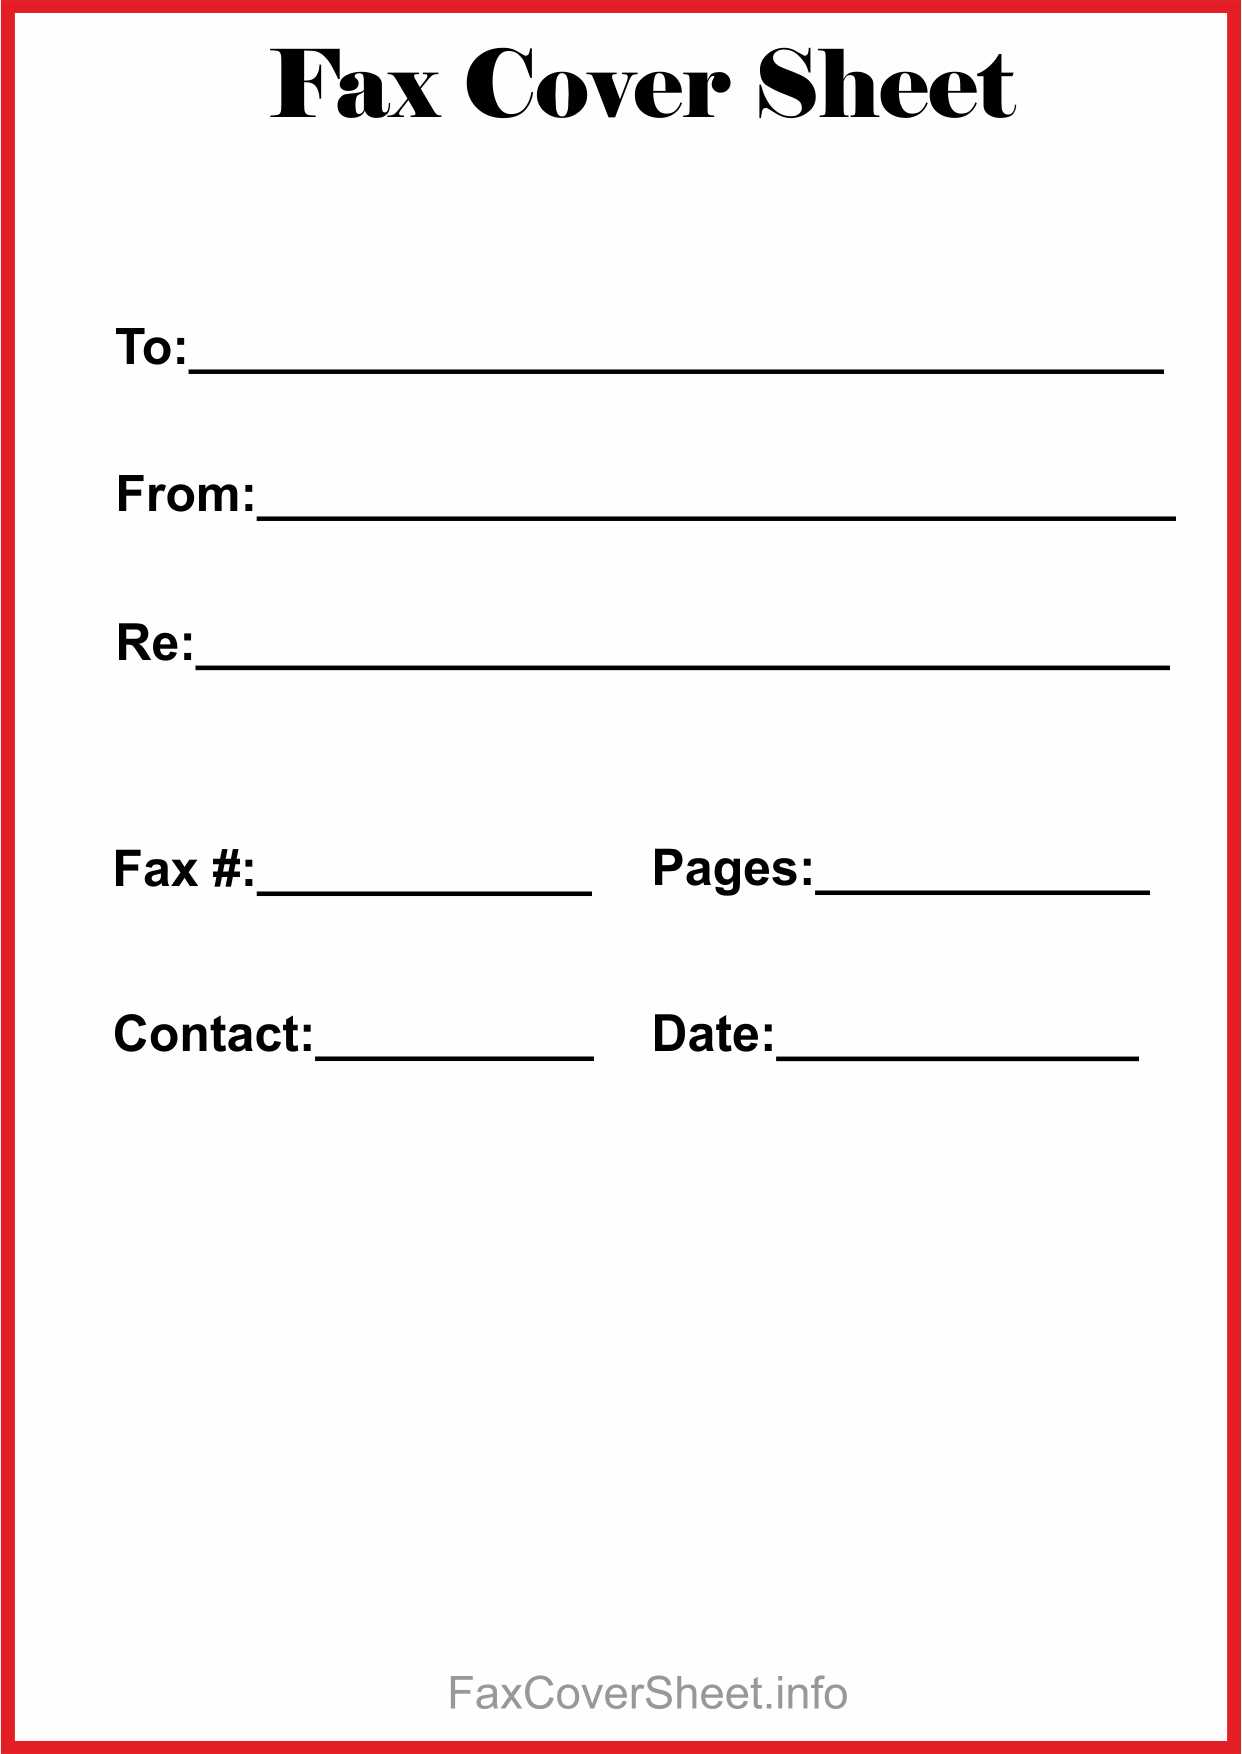 How To Find Blank Fax Cover Sheet Within Microsoft Word Throughout Fax Template Word 2010